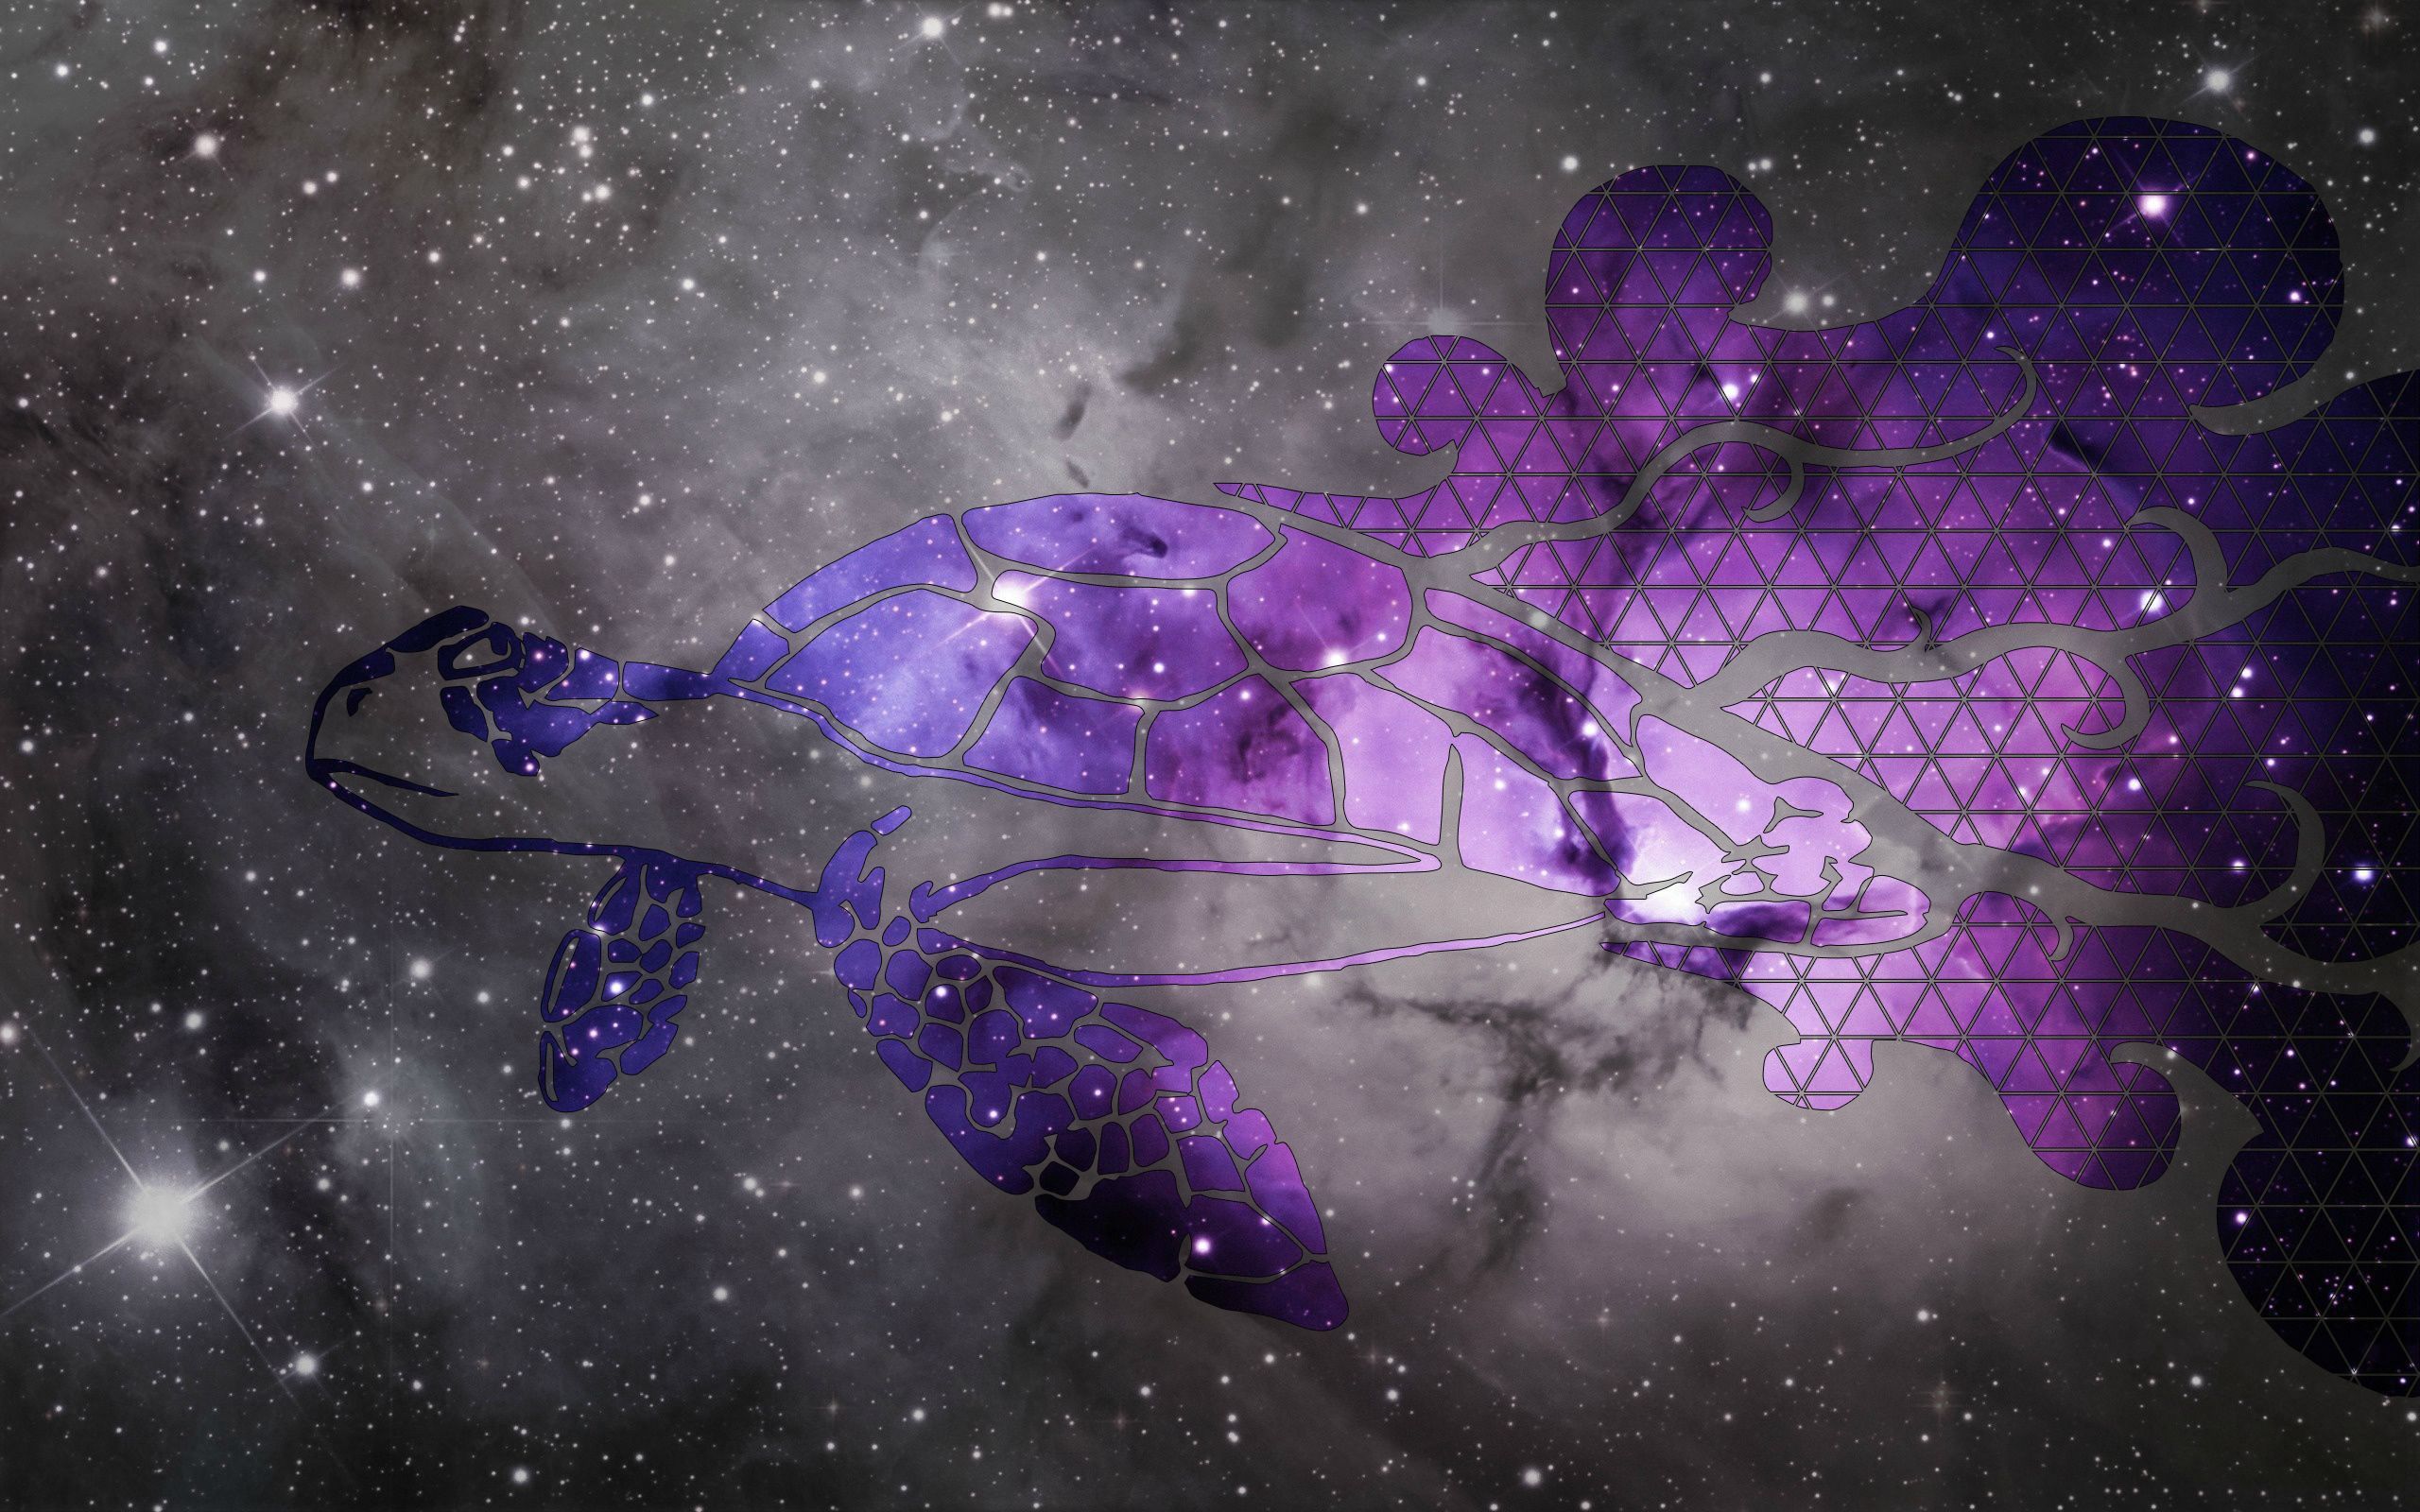 A purple turtle swimming in space - Turtle